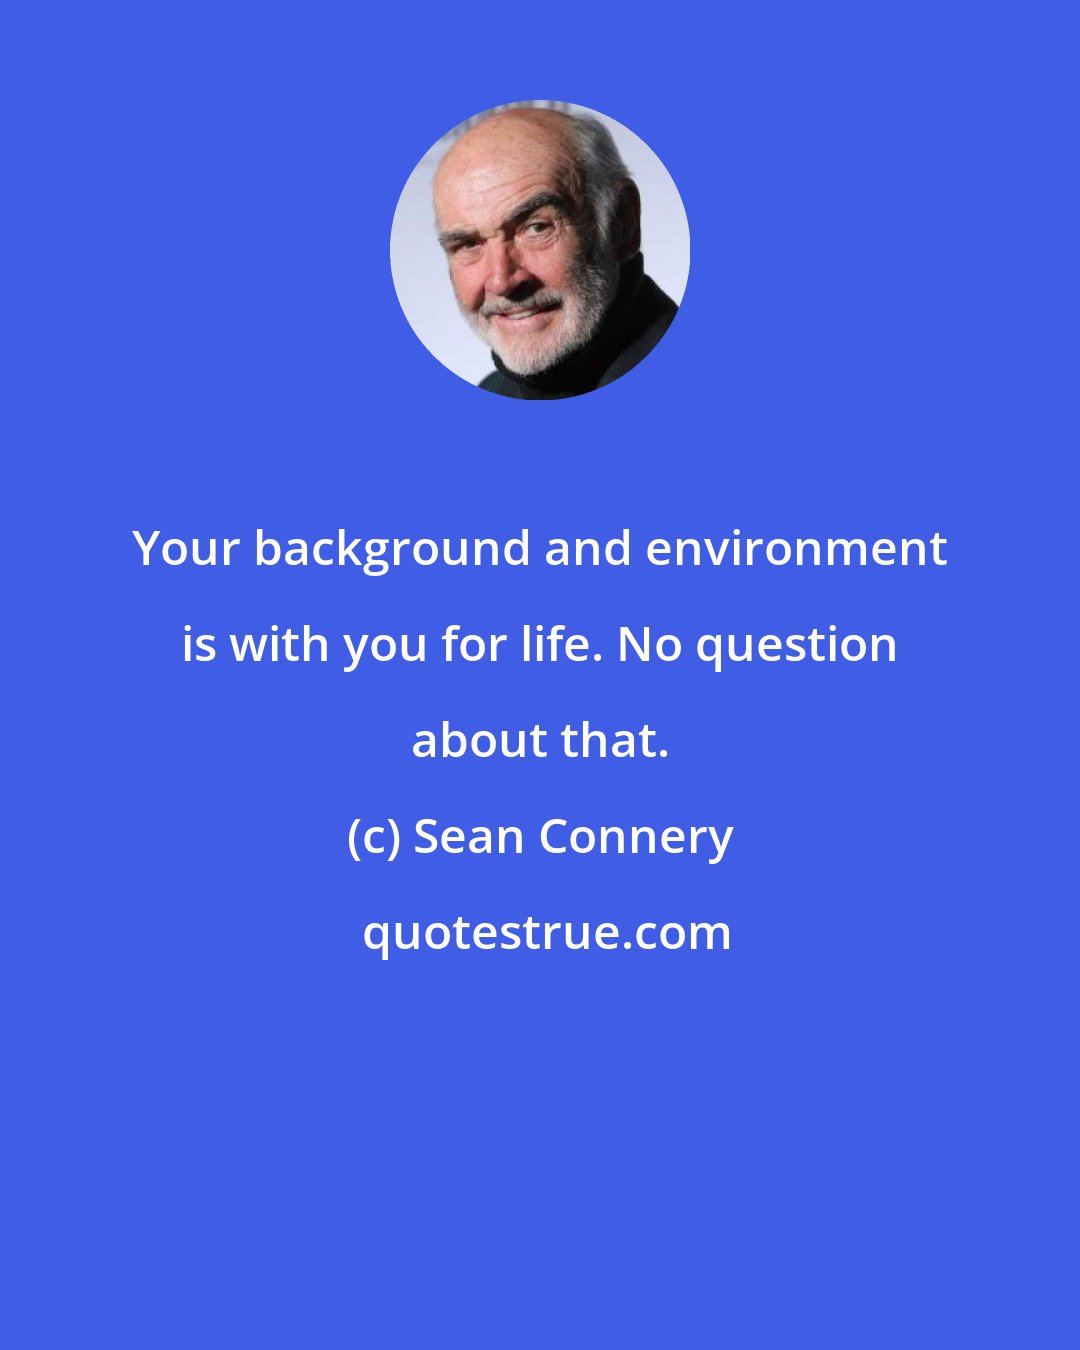 Sean Connery: Your background and environment is with you for life. No question about that.